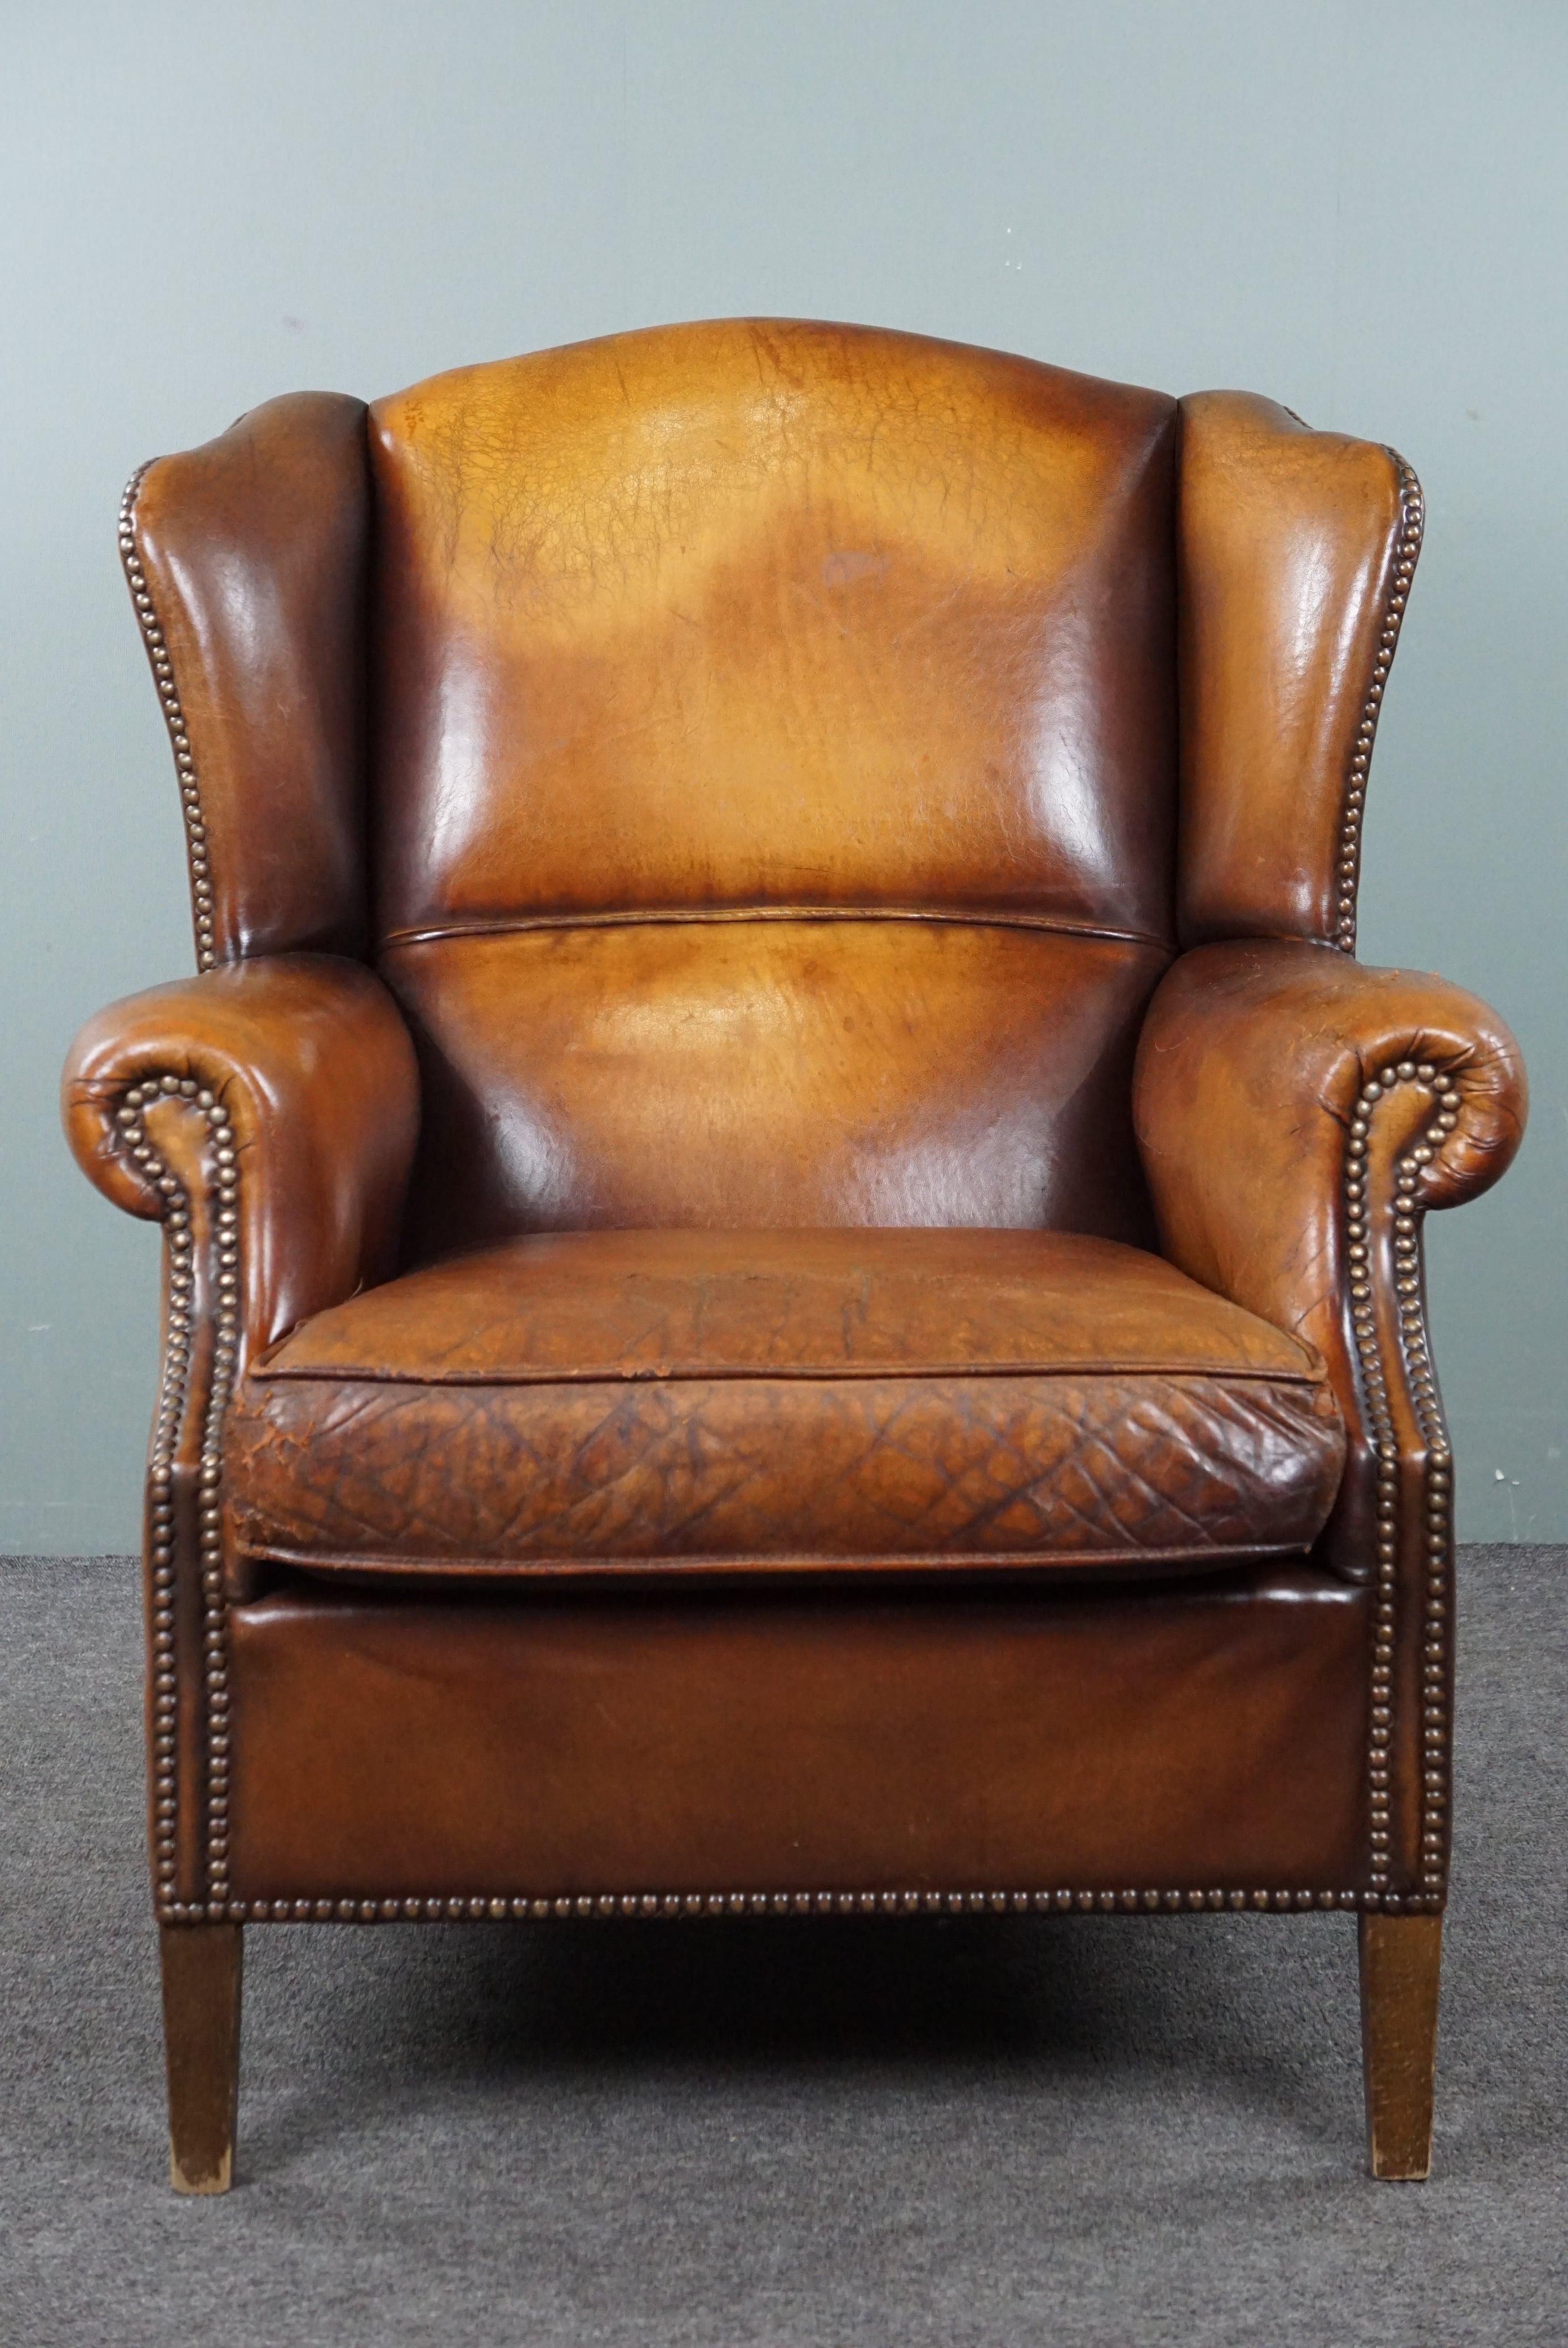 Offered is this striking sheep leather wingback chair. This sheep leather wingback chair is a positively striking item with a distinctive appearance. Thanks to its beautifully aged leather and timeless charm, this is a chair that many enthusiasts